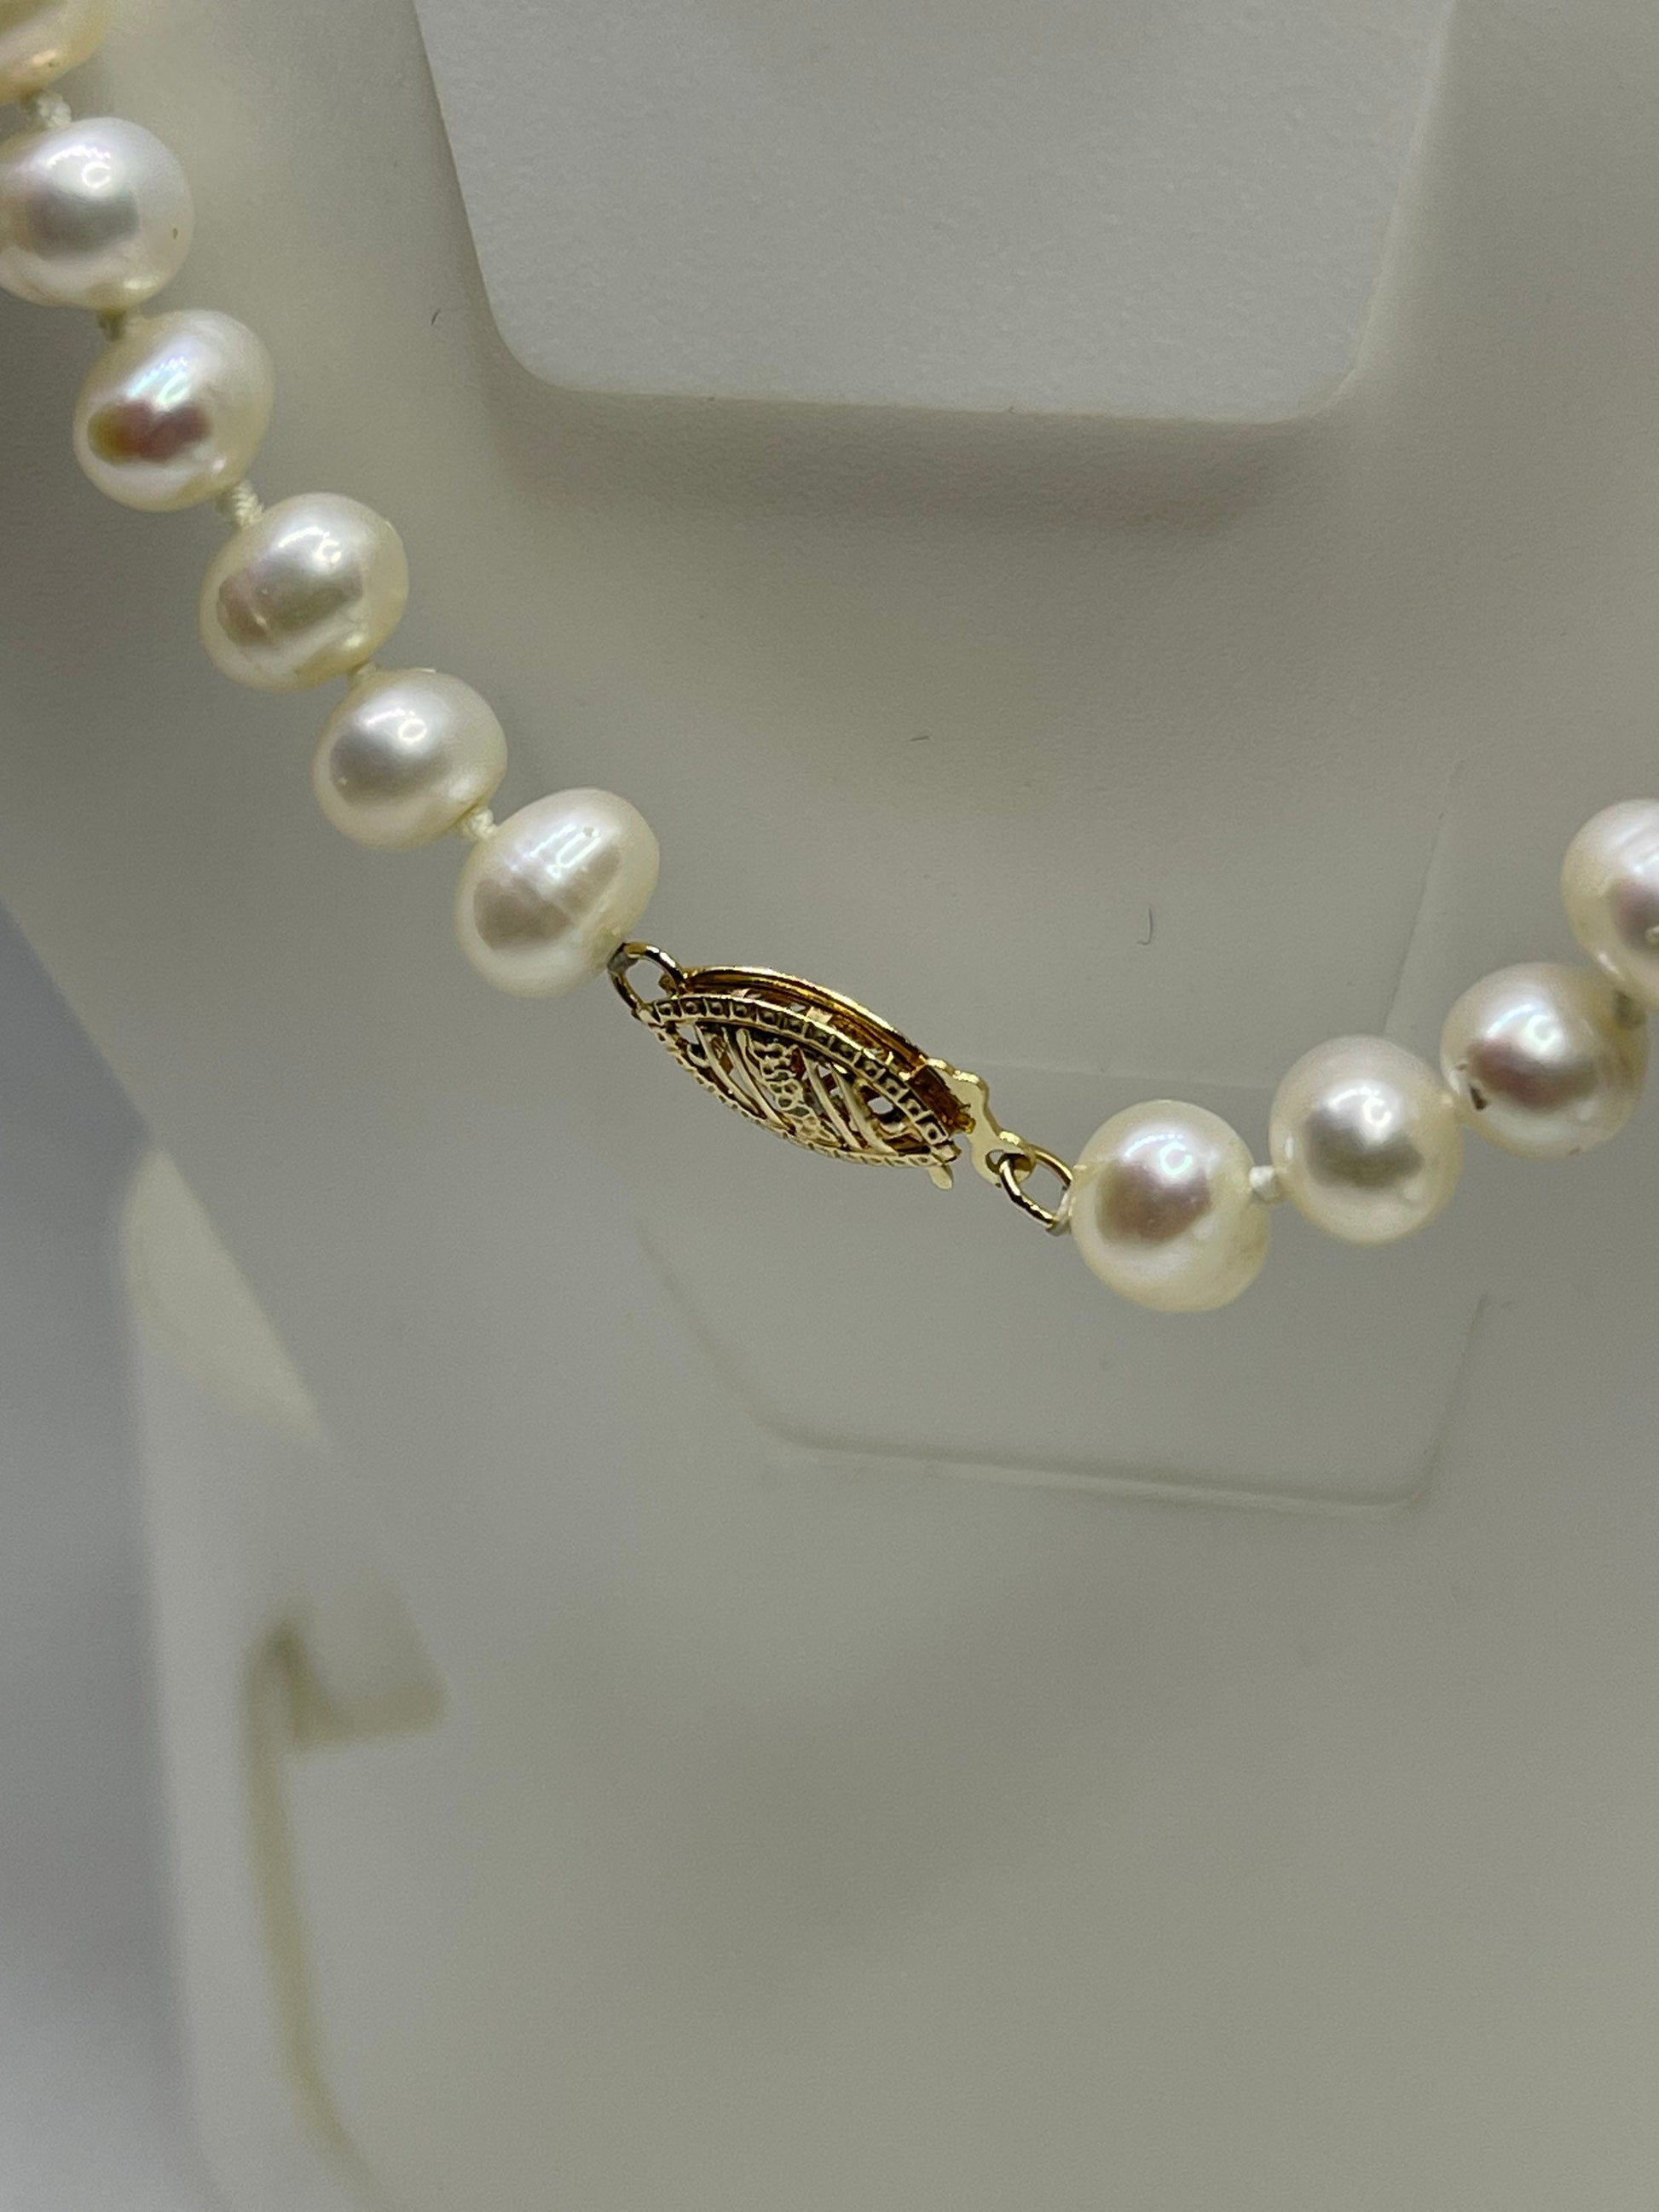 14K Yellow Gold Freshwater Cultured Pearl Fish Clasp Bracelet (6-7 mm)